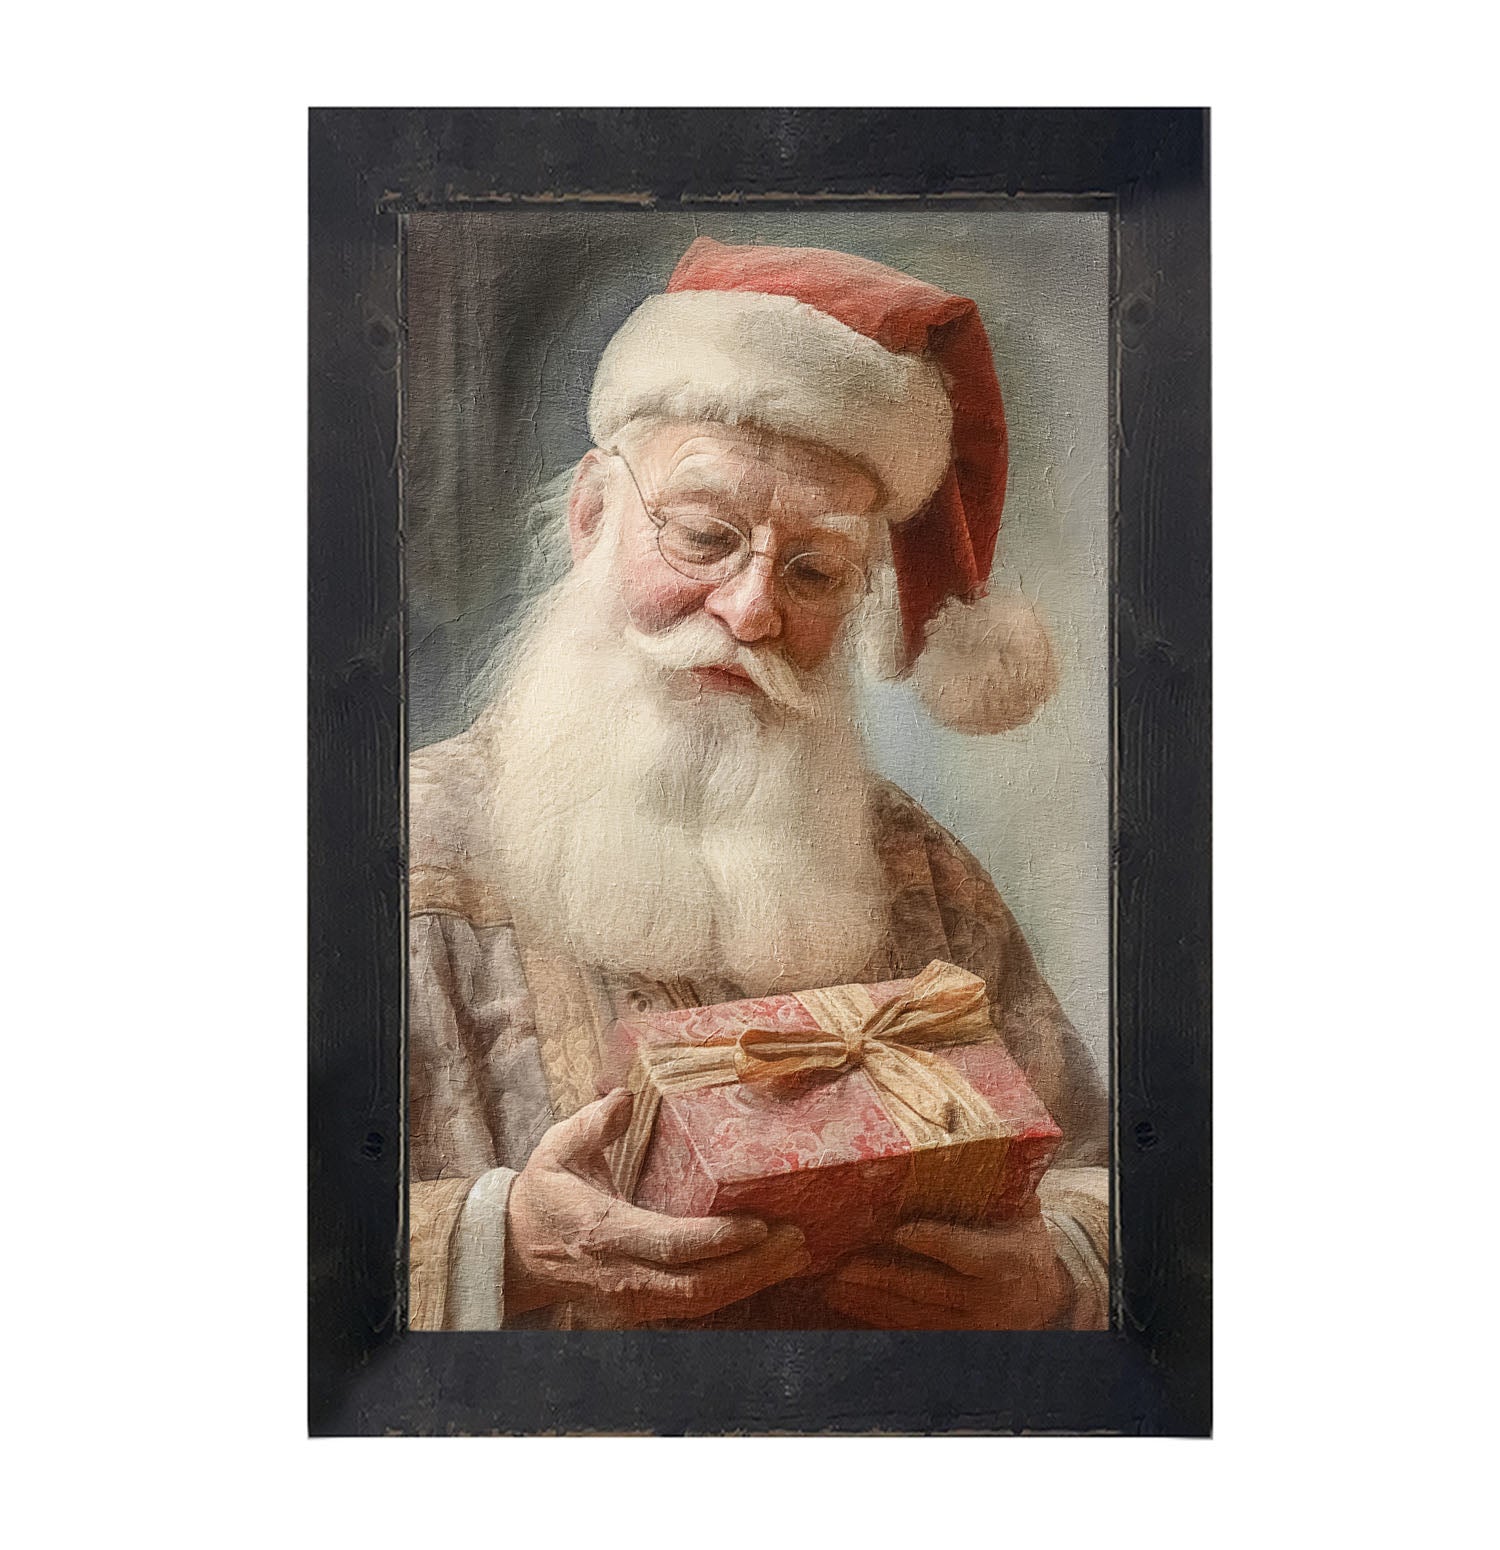 Old world Santa with glasses